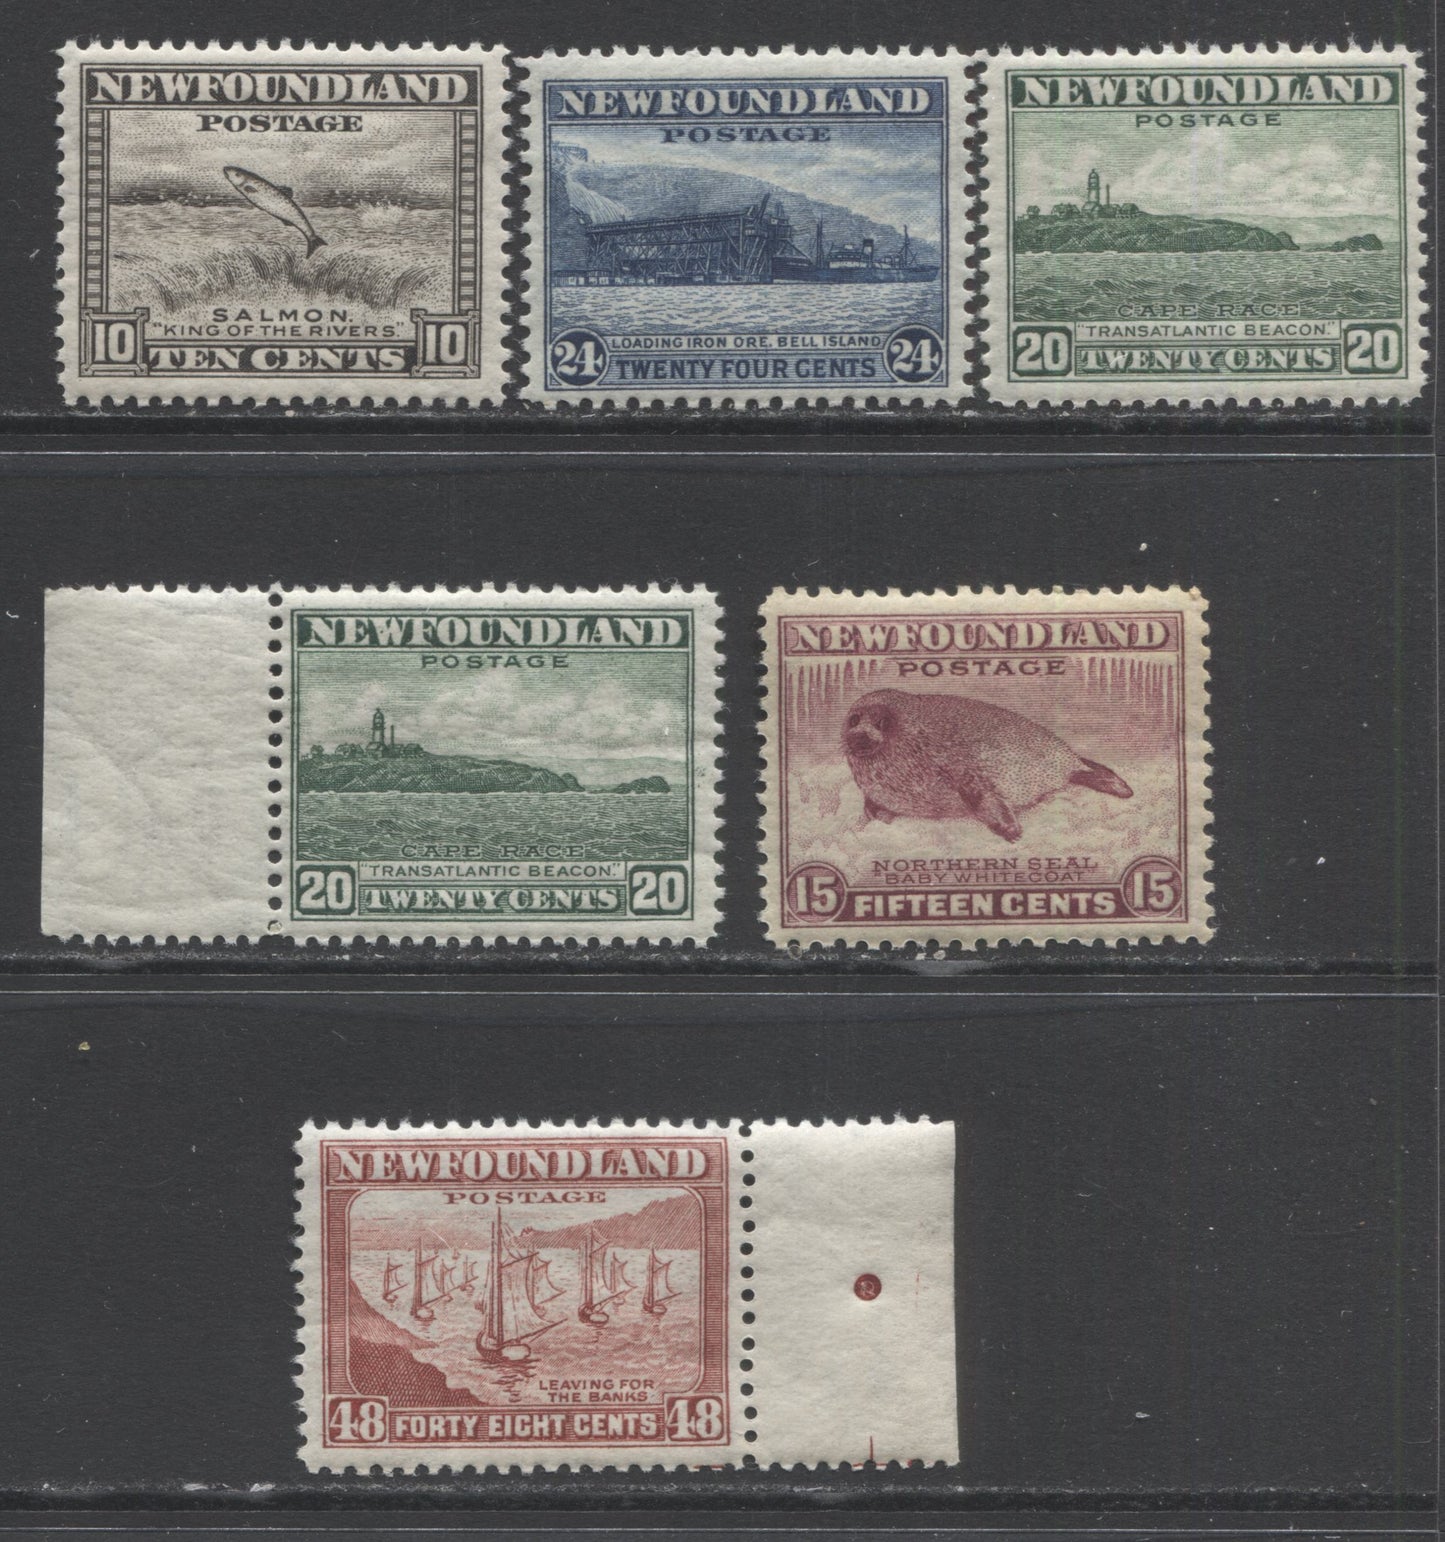 Lot 355 Newfoundland #260, 262, 263, 264, 266 10c - 48c Brownish Black - Red Brown Salmon Leaping Falls - Fishing Fleet, 1941-1944 Waterlow Printings Definitive Reissue, 6 F/VFNH Singles Showing Different Perfs